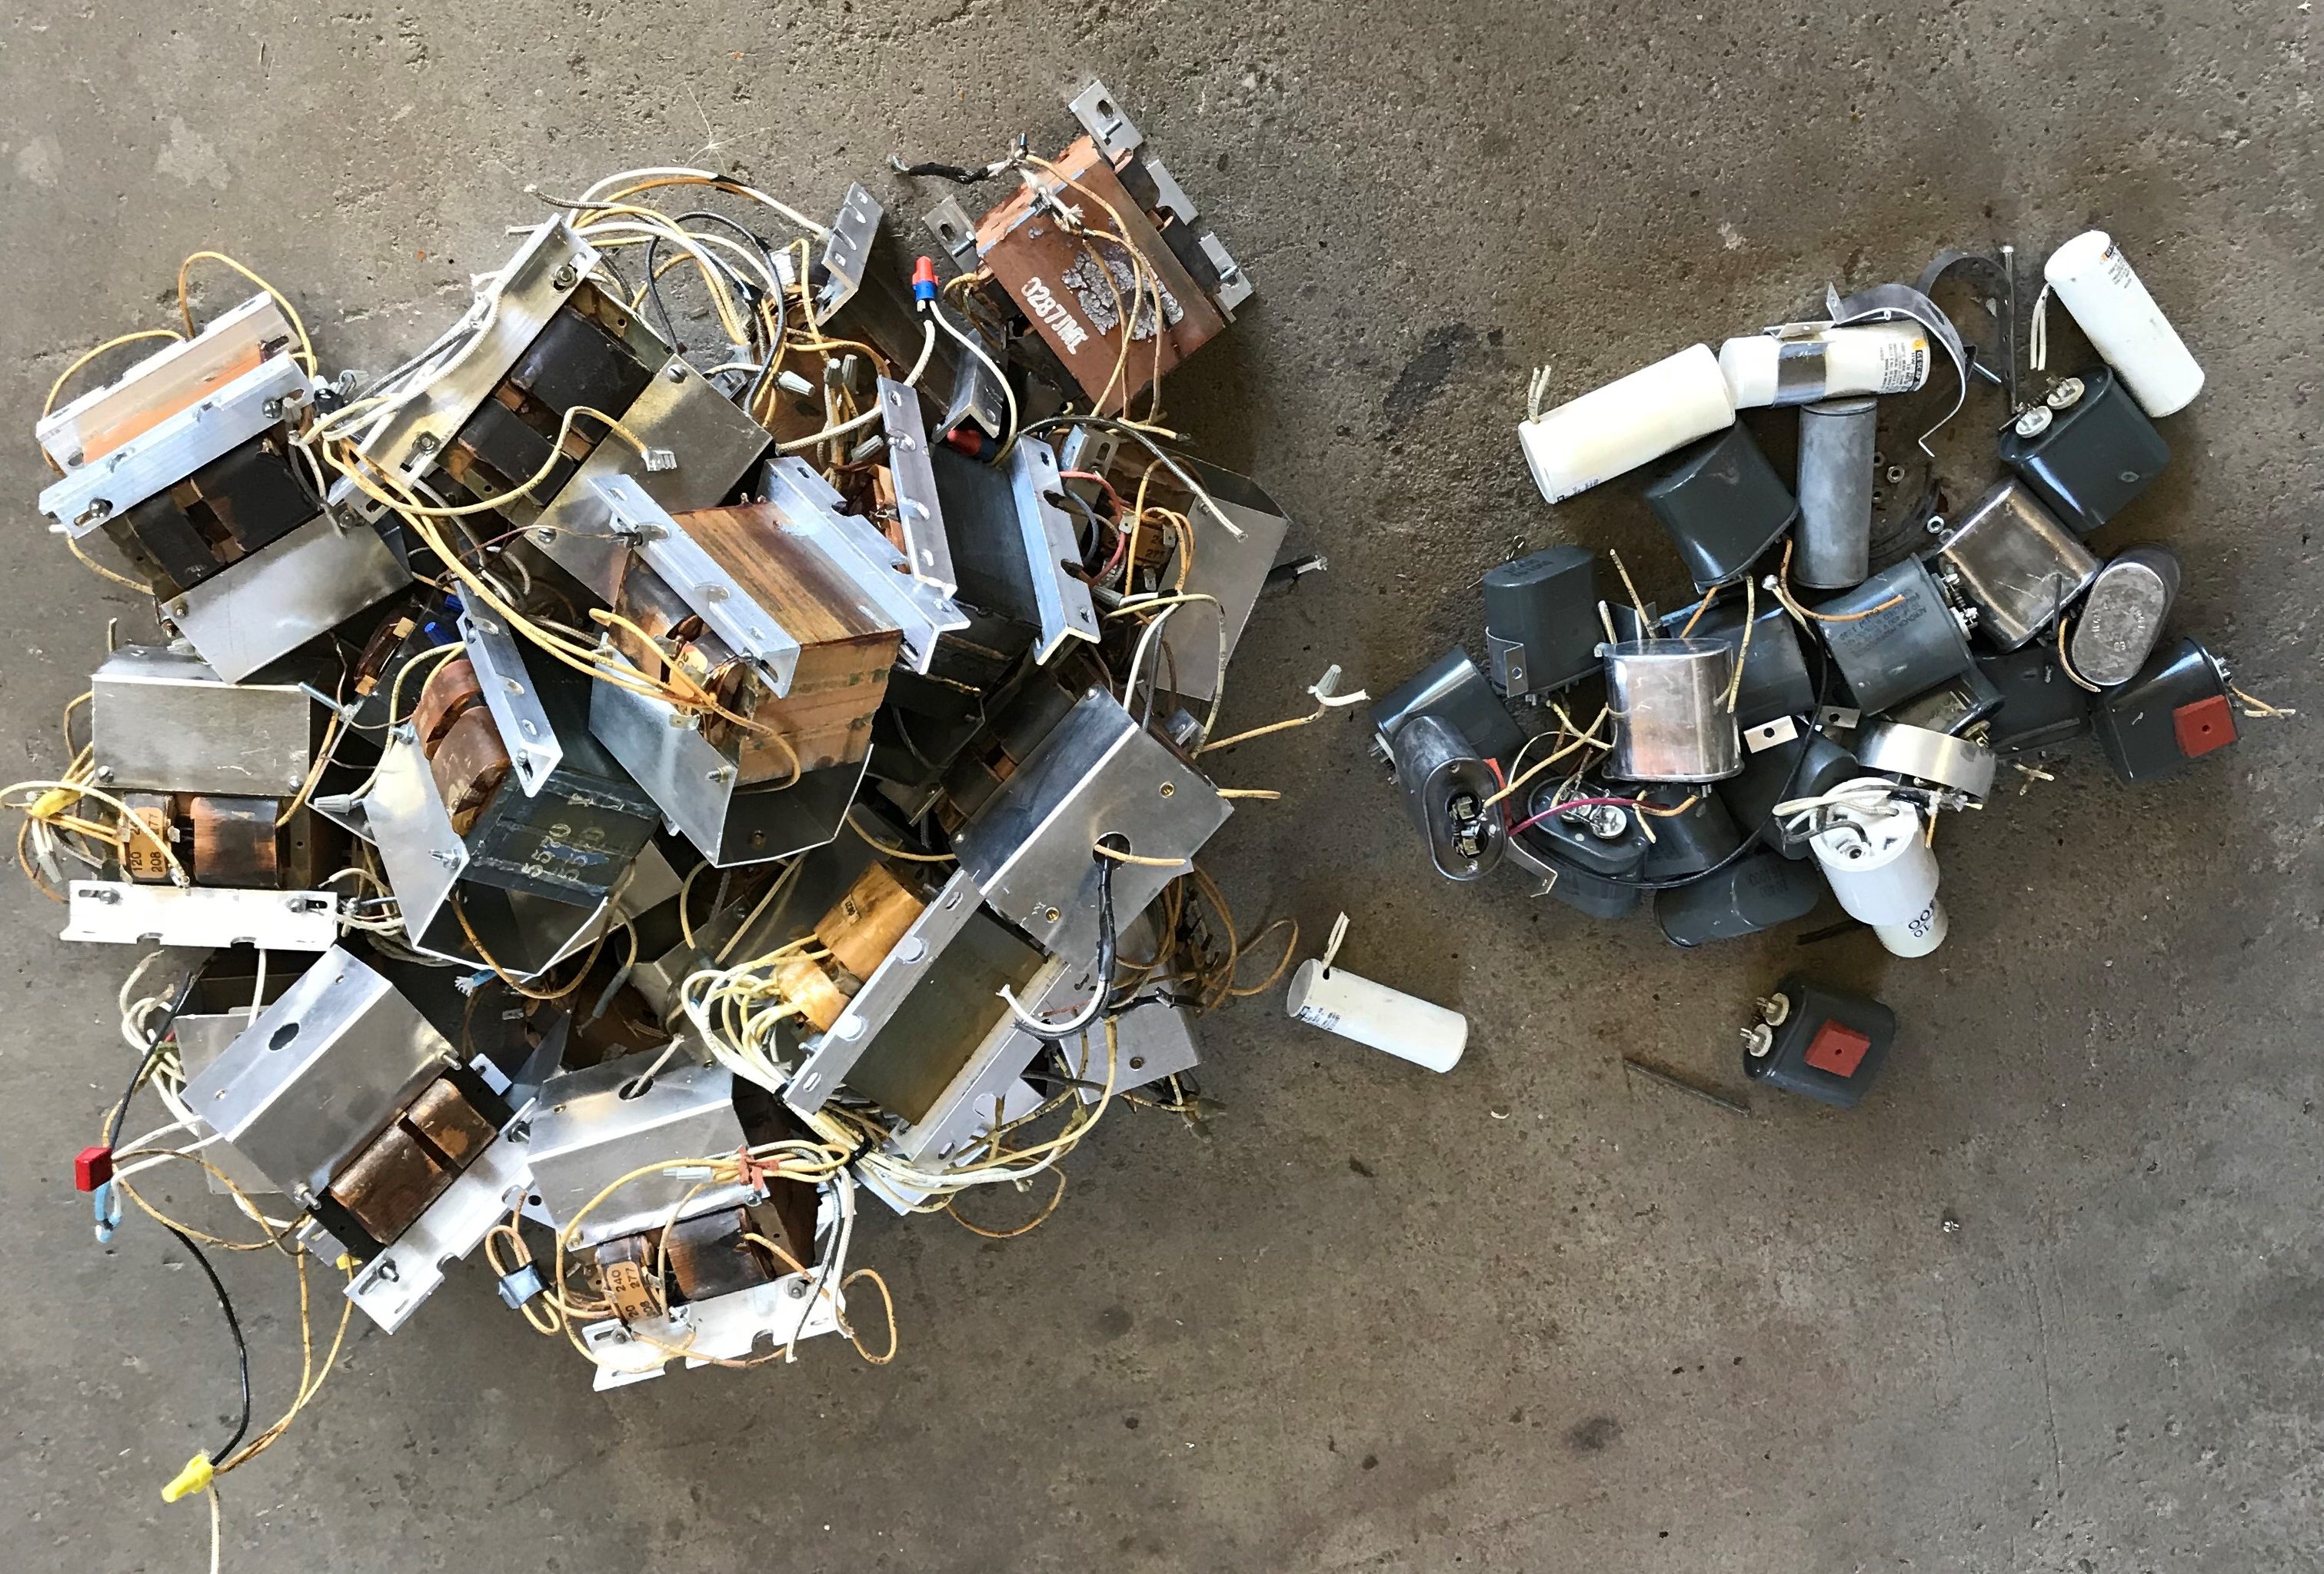 The hydroelectric team at Dillon separated waste from a major lighting retrofit, recycling these capacitors instead of sending them to the Summit County landfill. Photo credit: Denver Water.